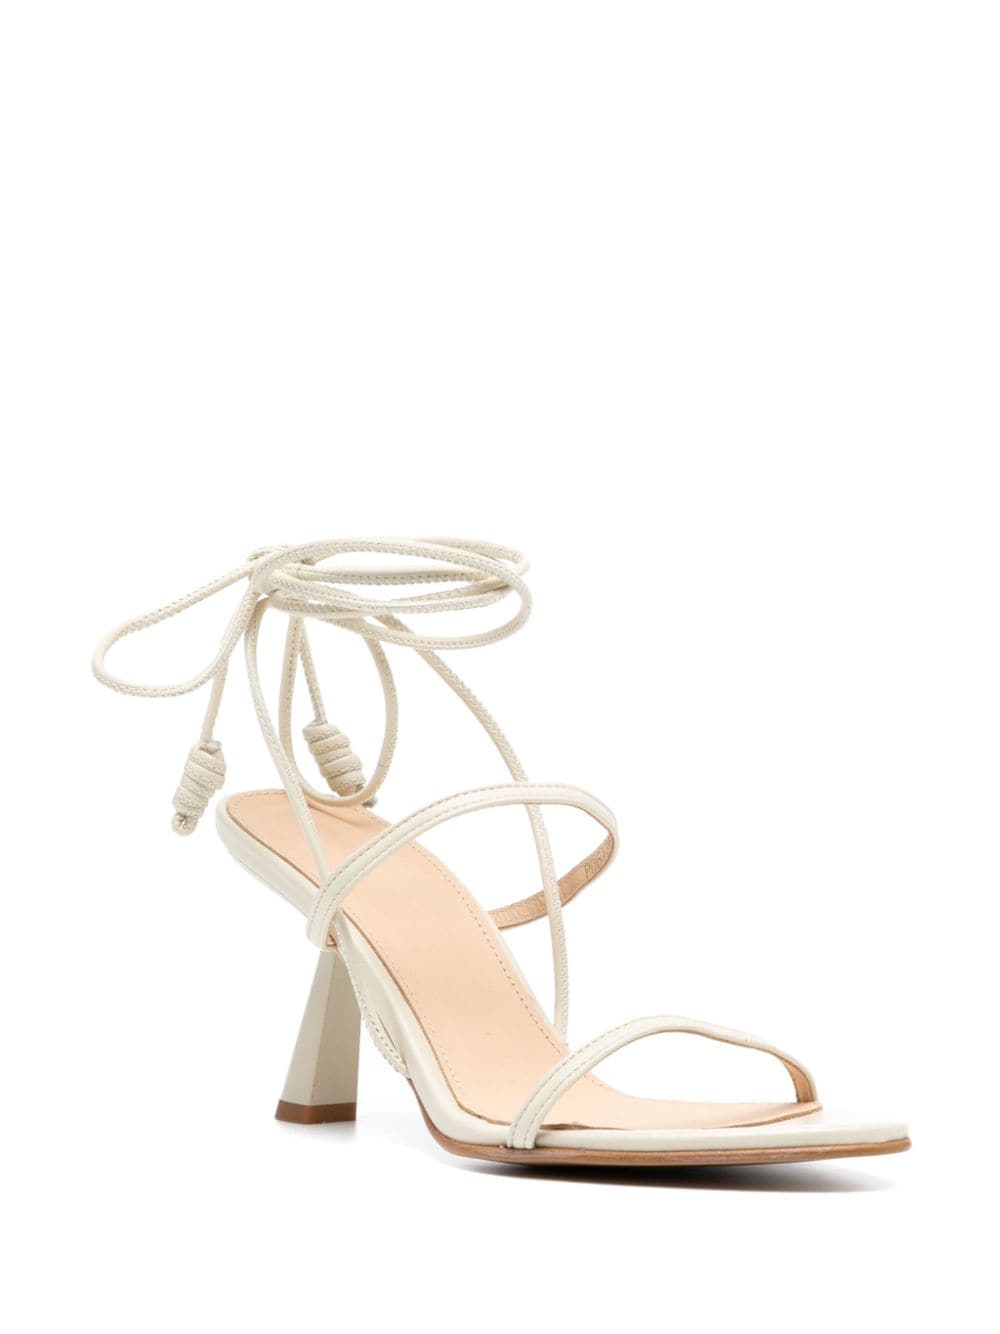 ALOHAS 65mm leather sandals - Beige